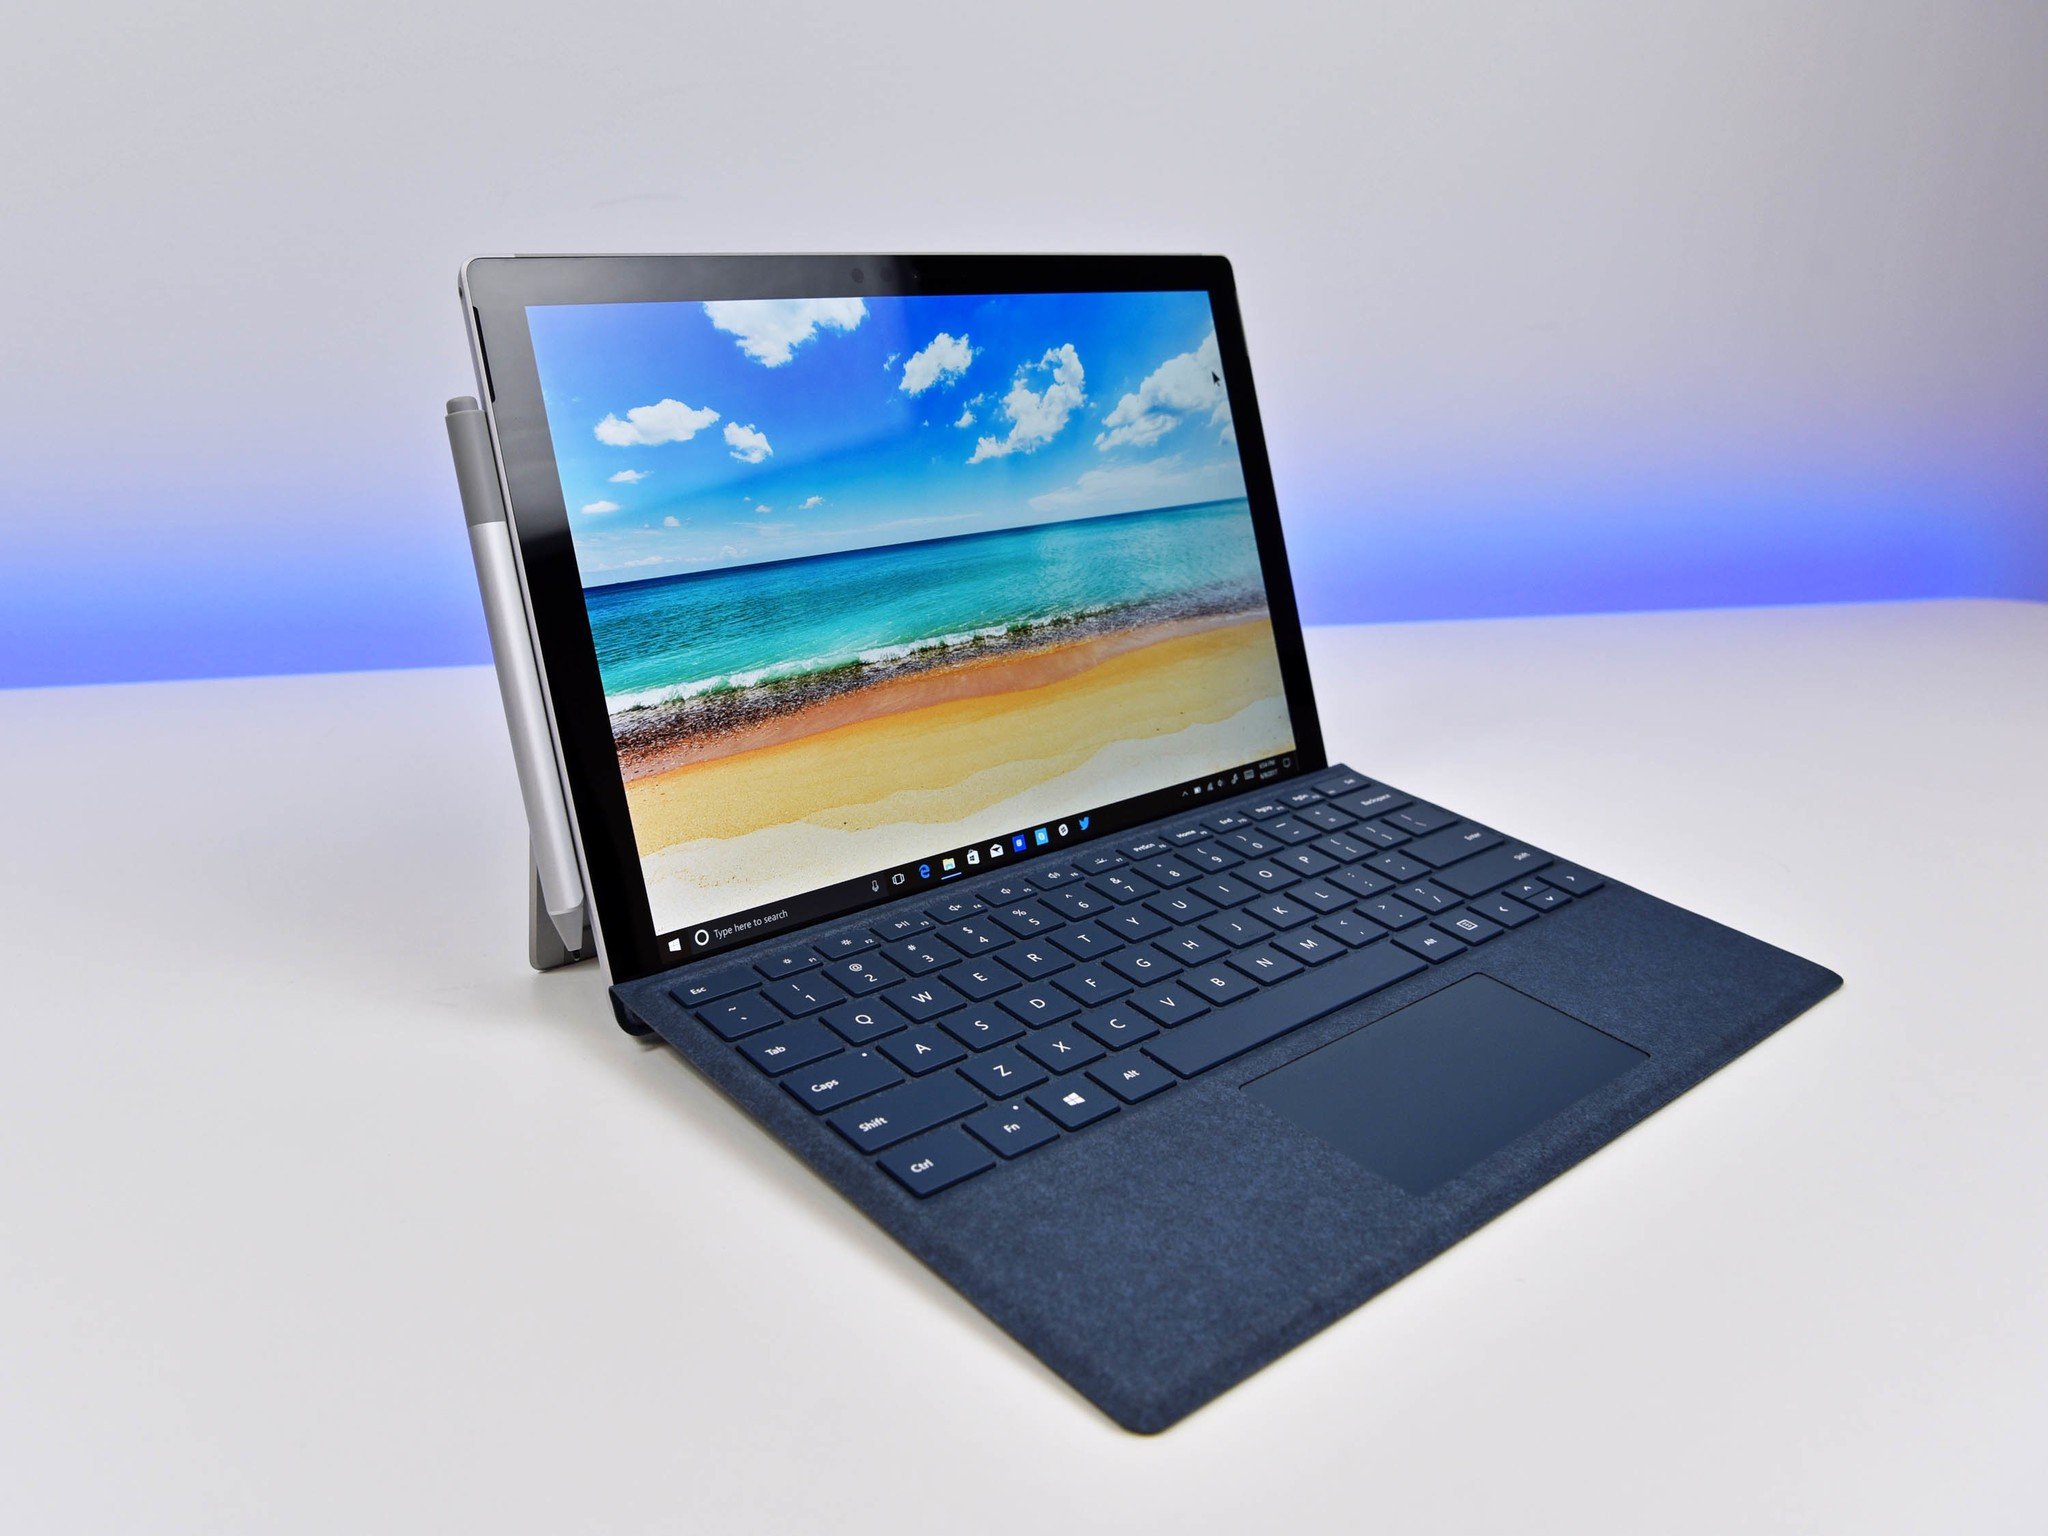 New $999 Surface Pro configuration now available from Microsoft